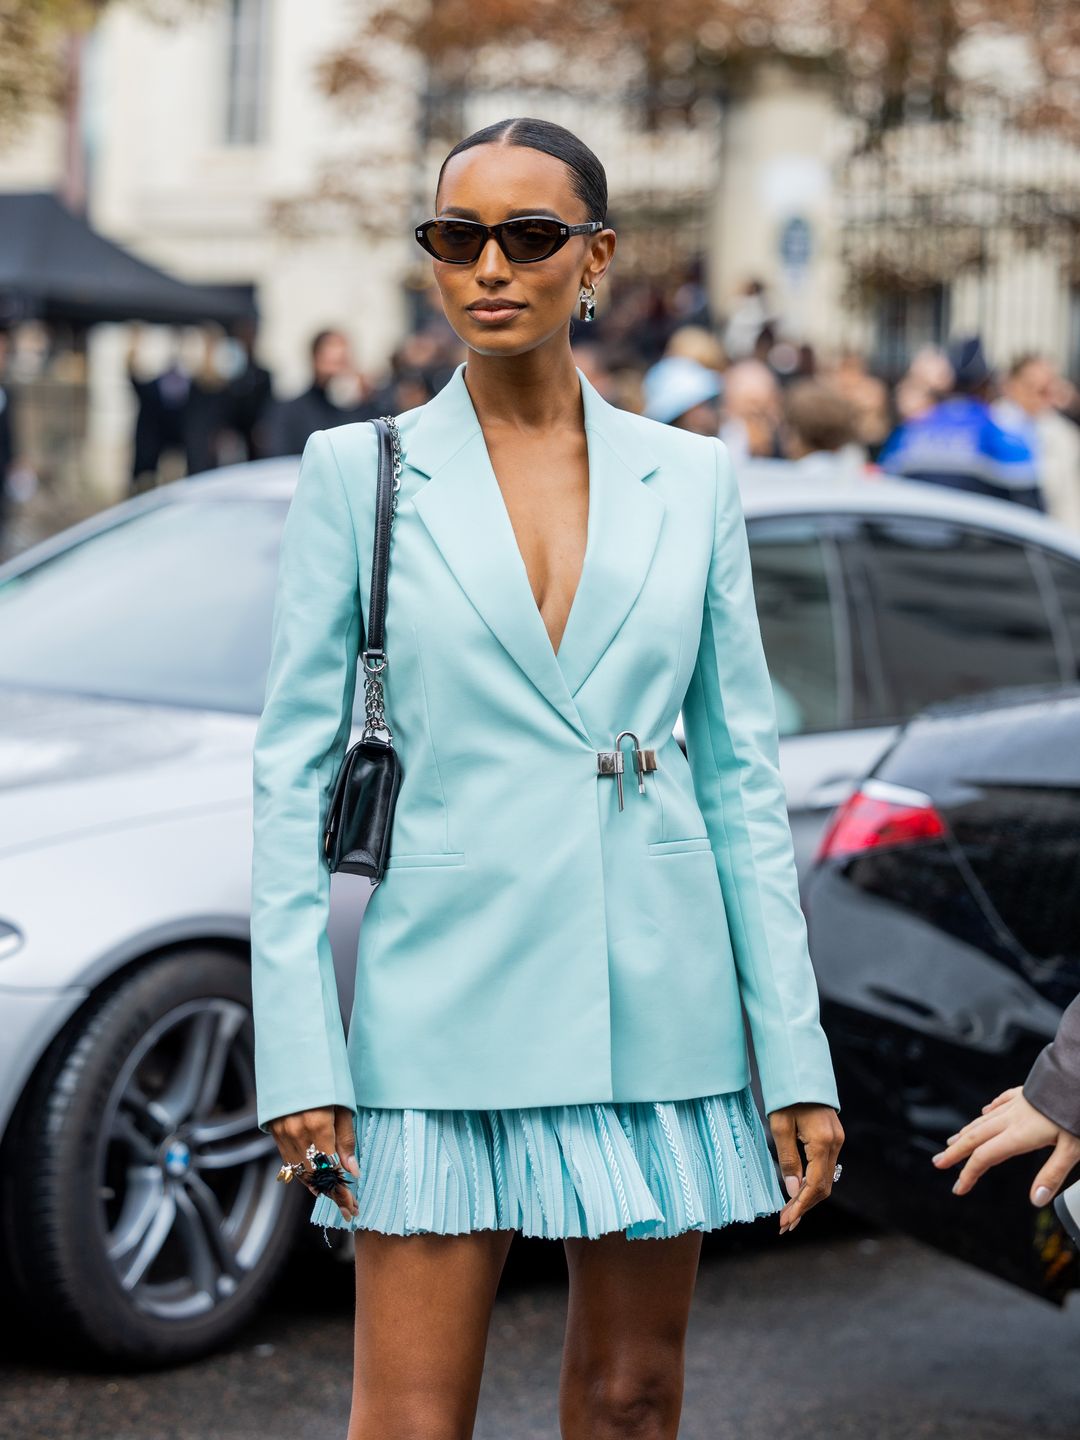 A Paris Fashion Week guest wears turquoise blazer with a pleated mini skirt